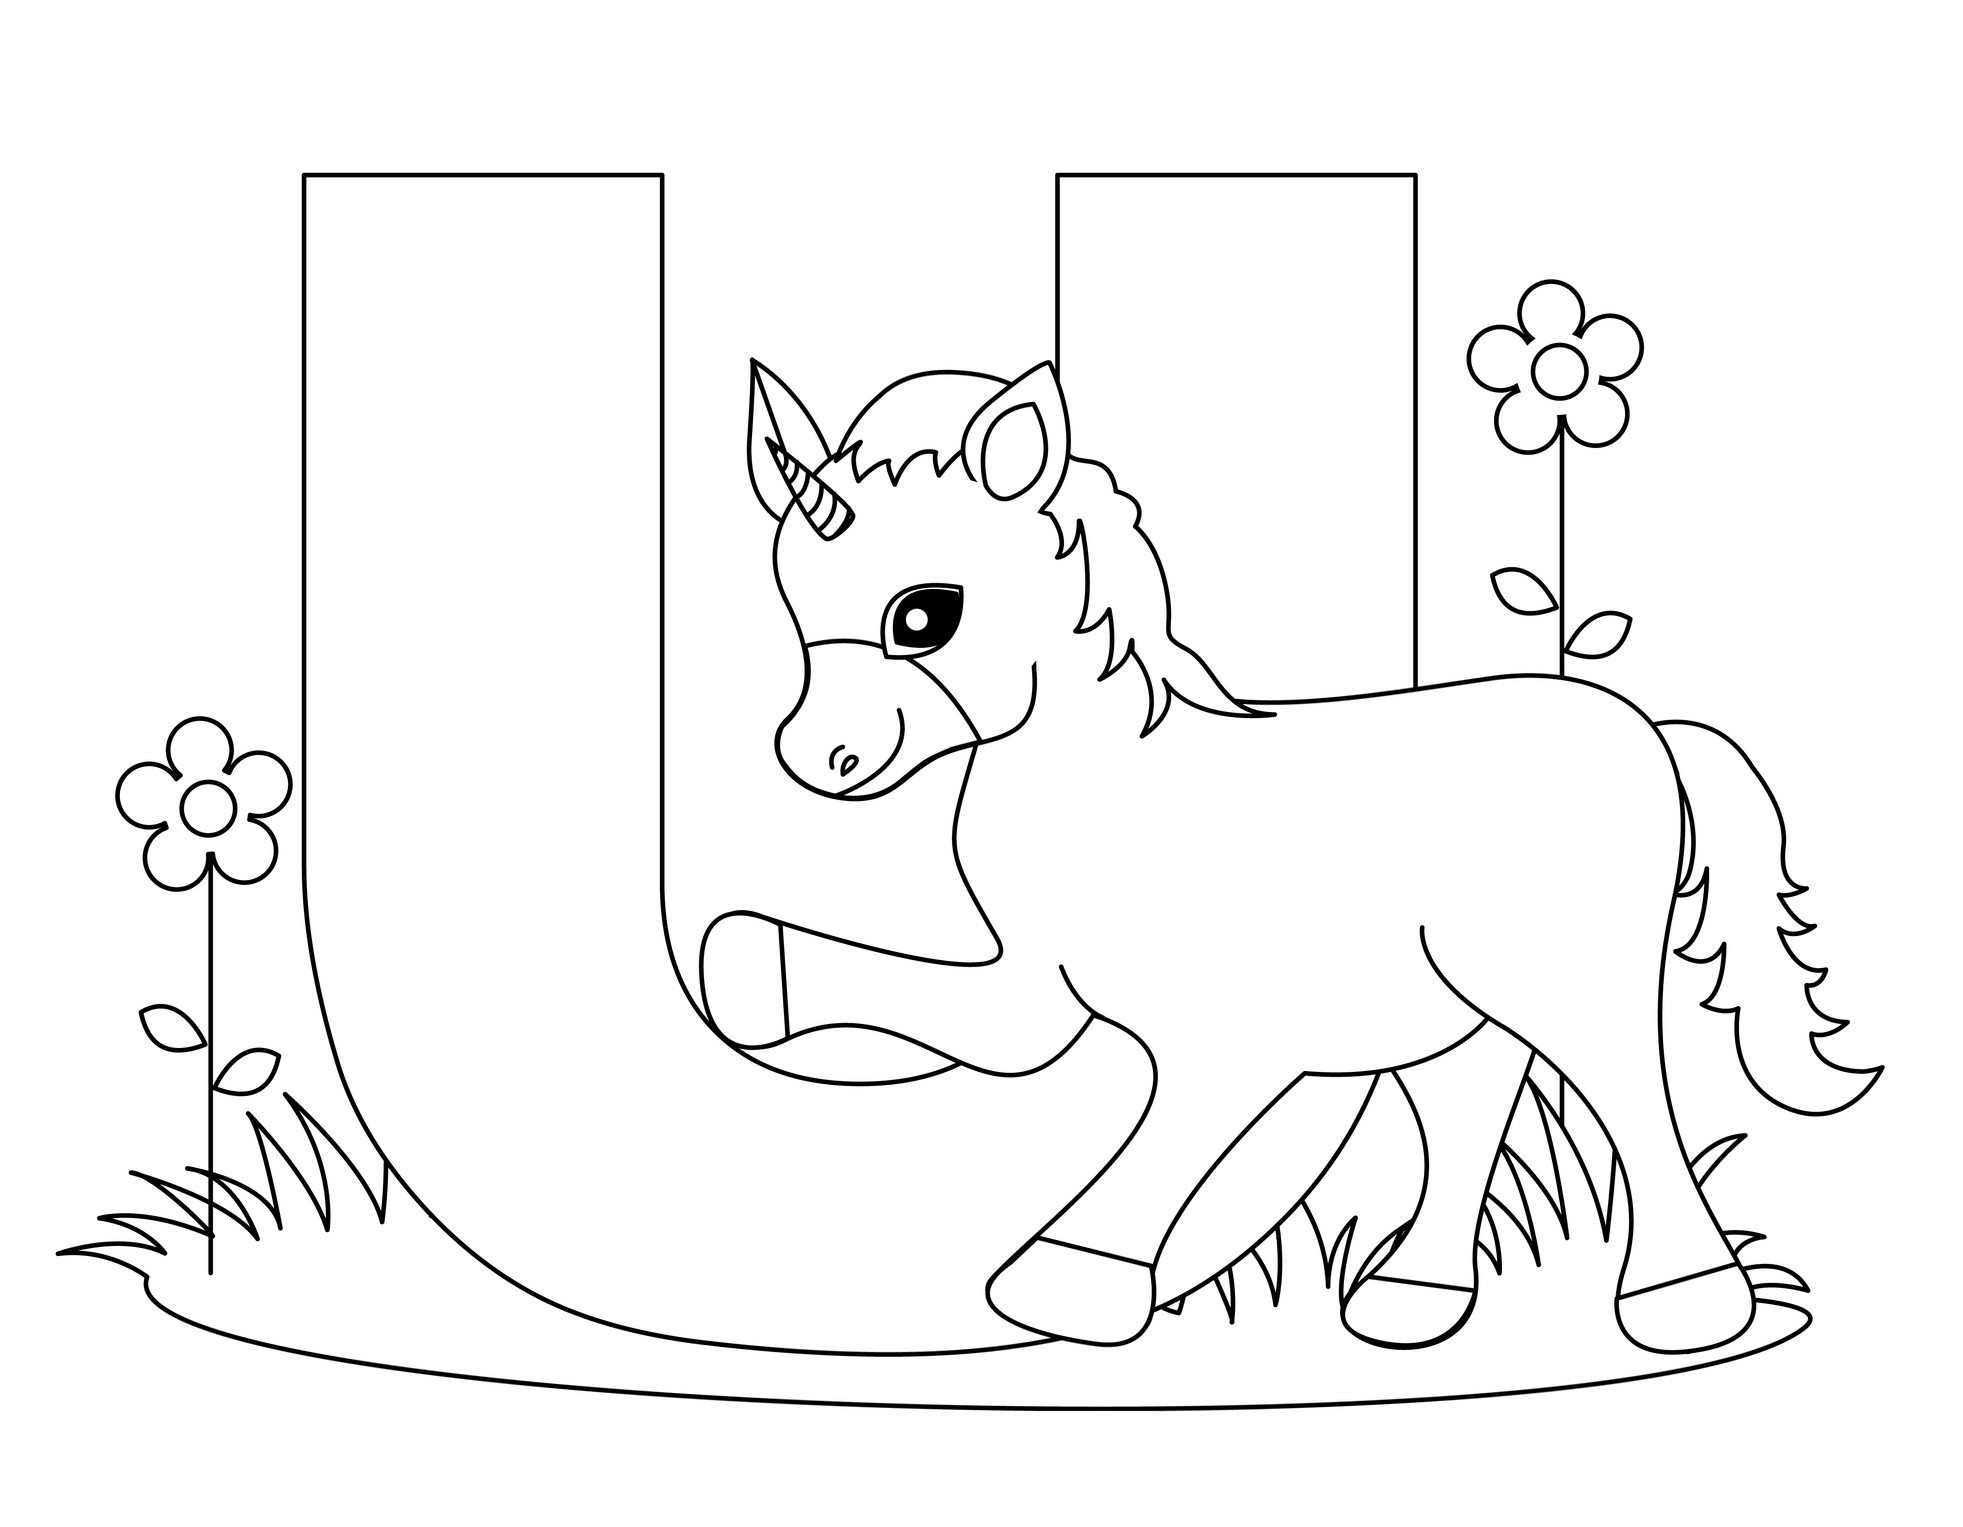 Alphabet Coloring Book Printable
 Free Printable Alphabet Coloring Pages for Kids Best